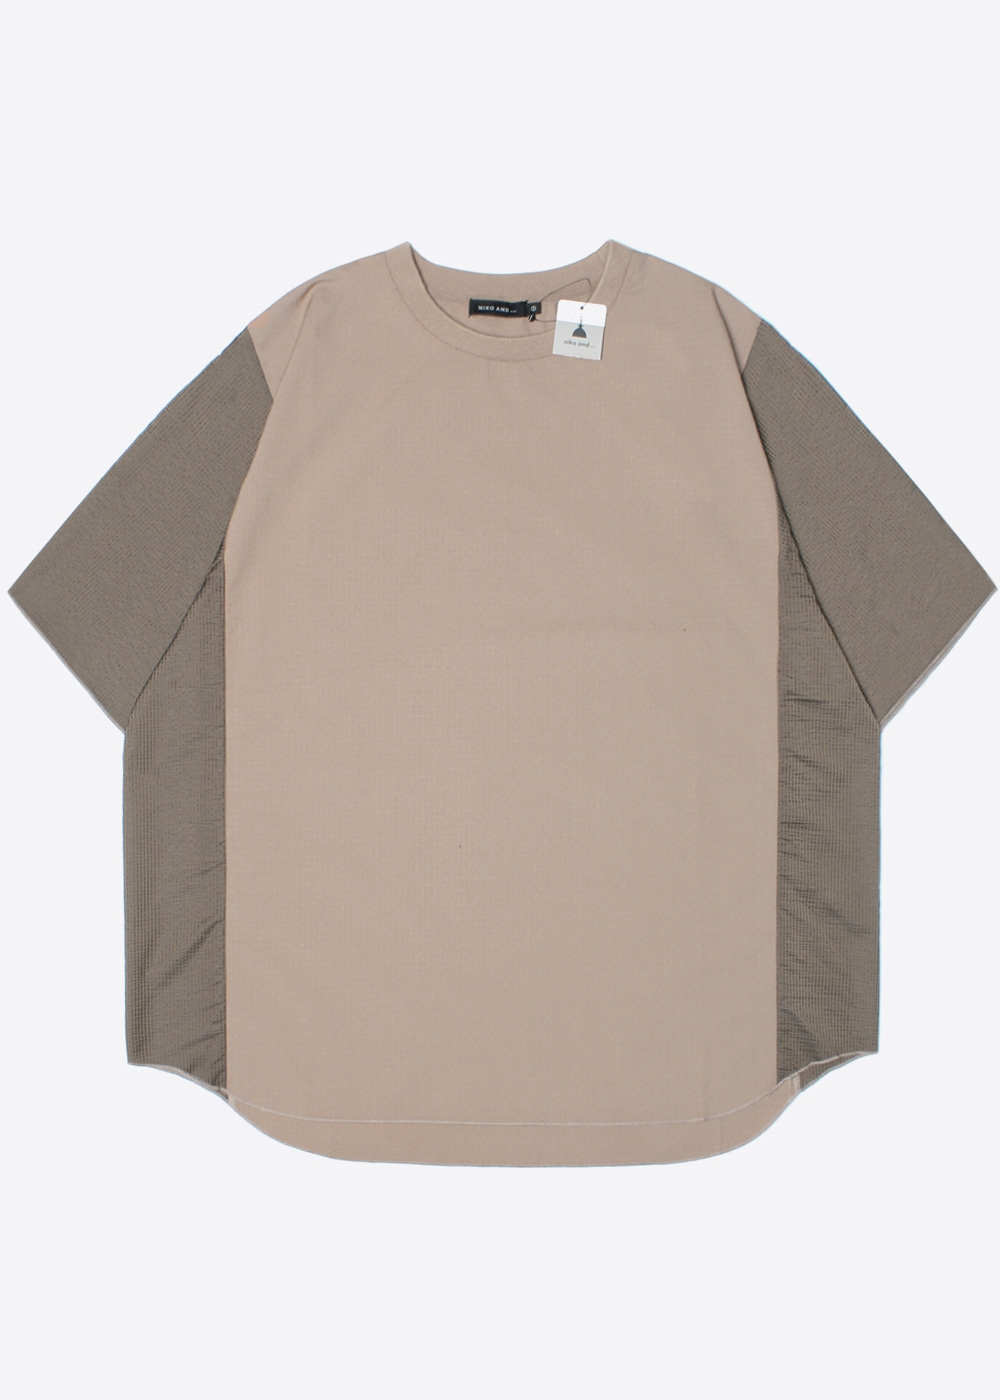 NIKO AND’over fit’ cotton side diteil t-shirt